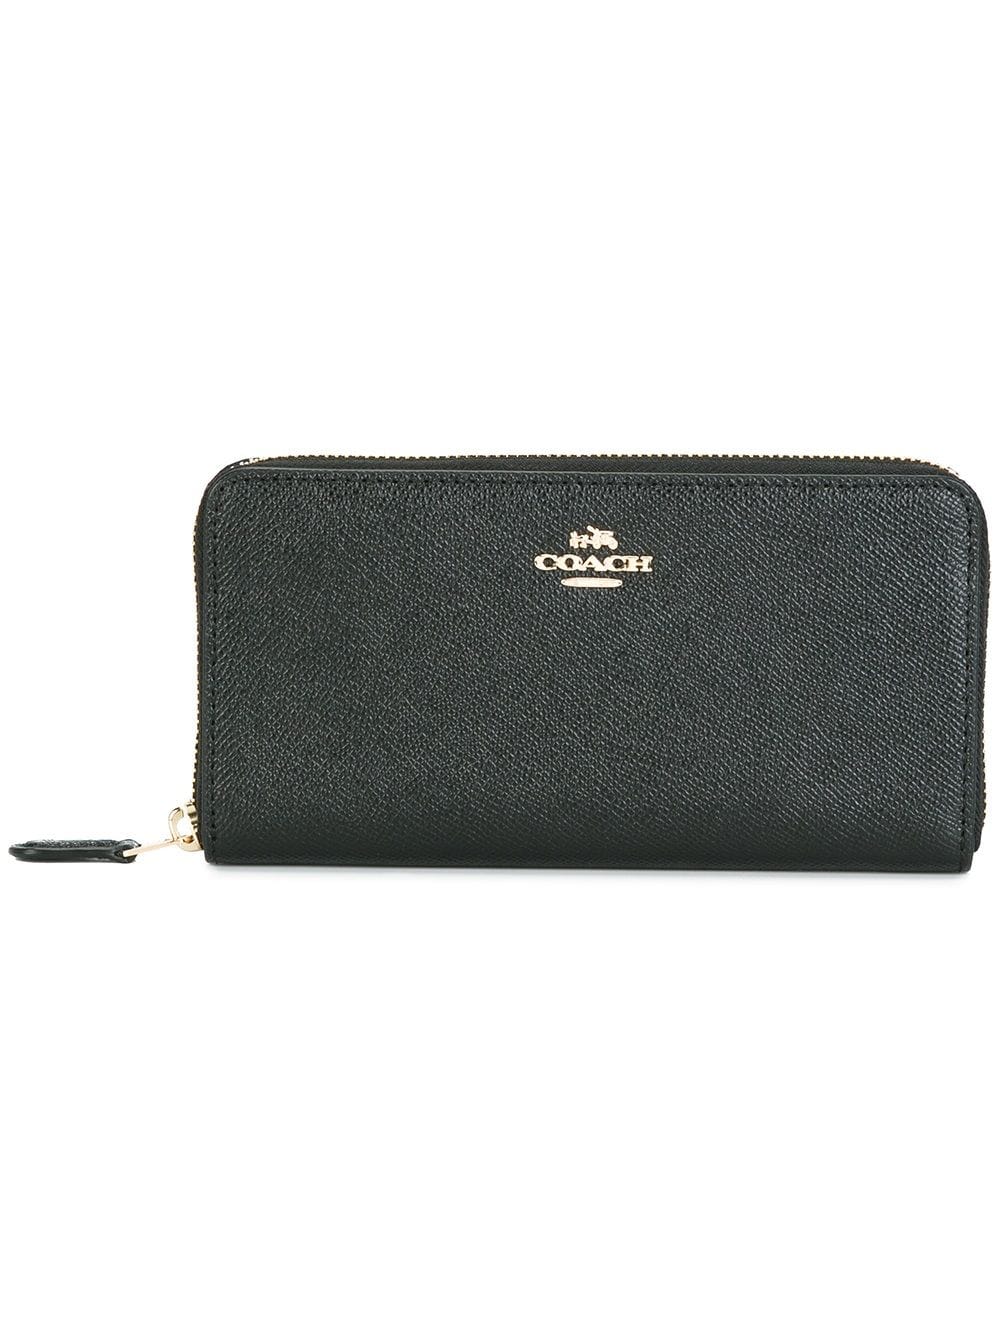 Shop Coach According zip wallet with Express Delivery - FARFETCH